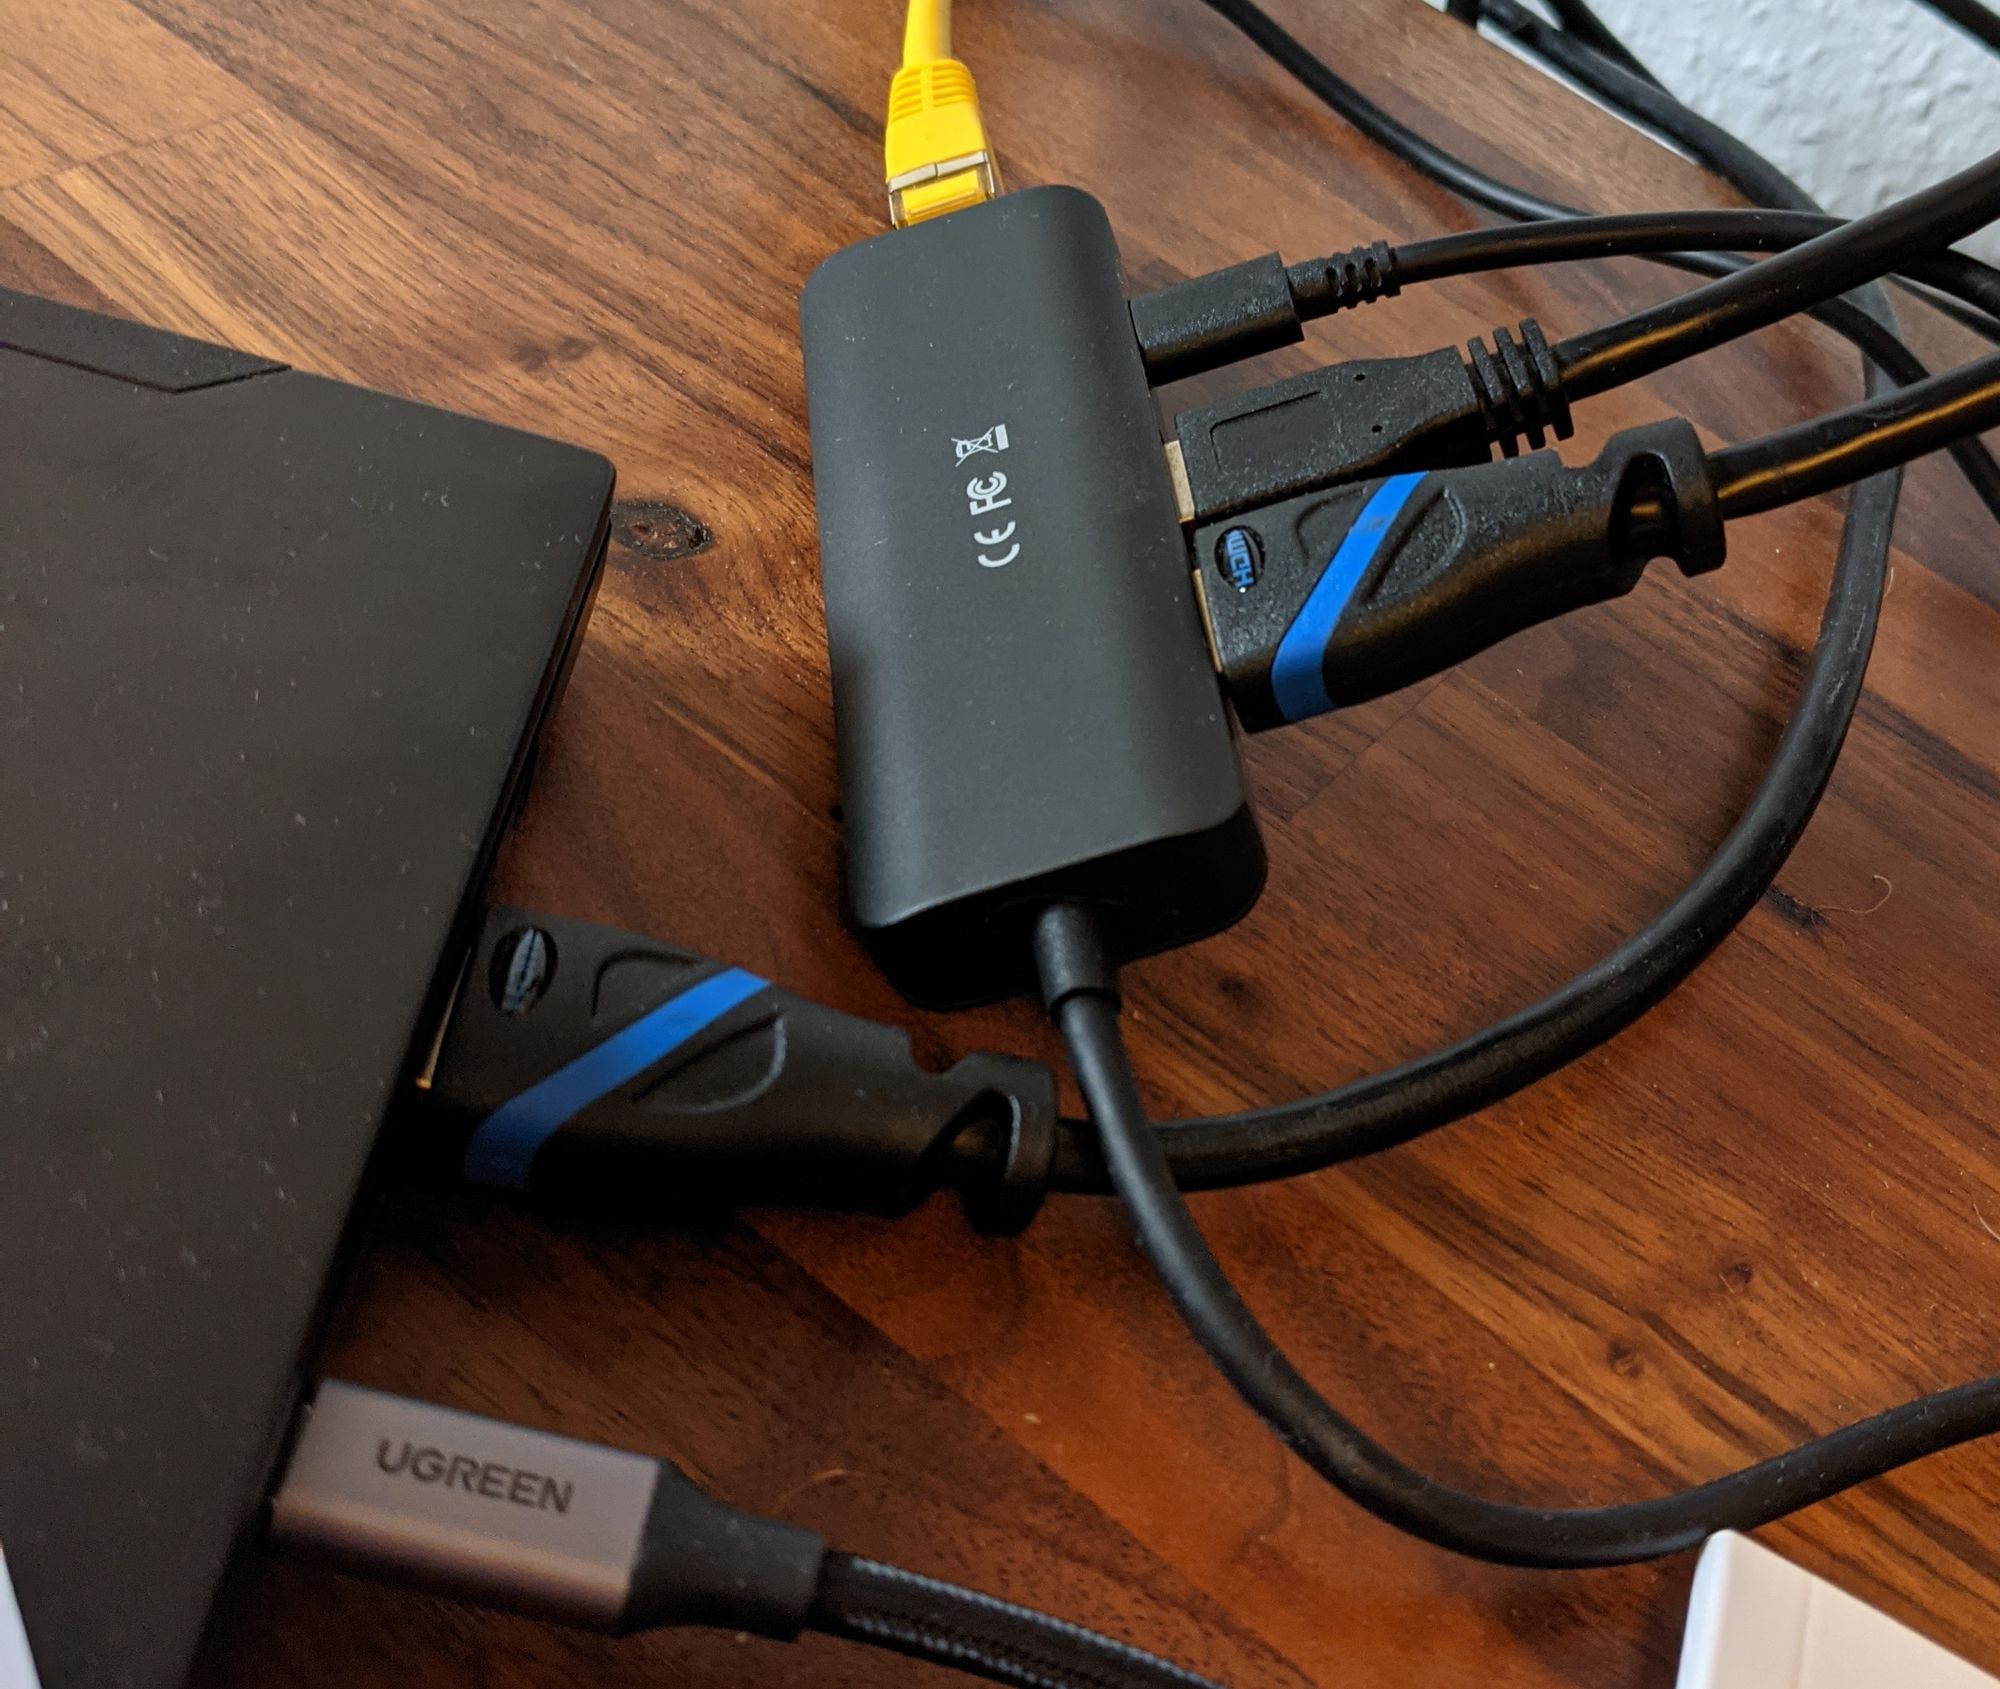 USB-C Dongle attached to laptop